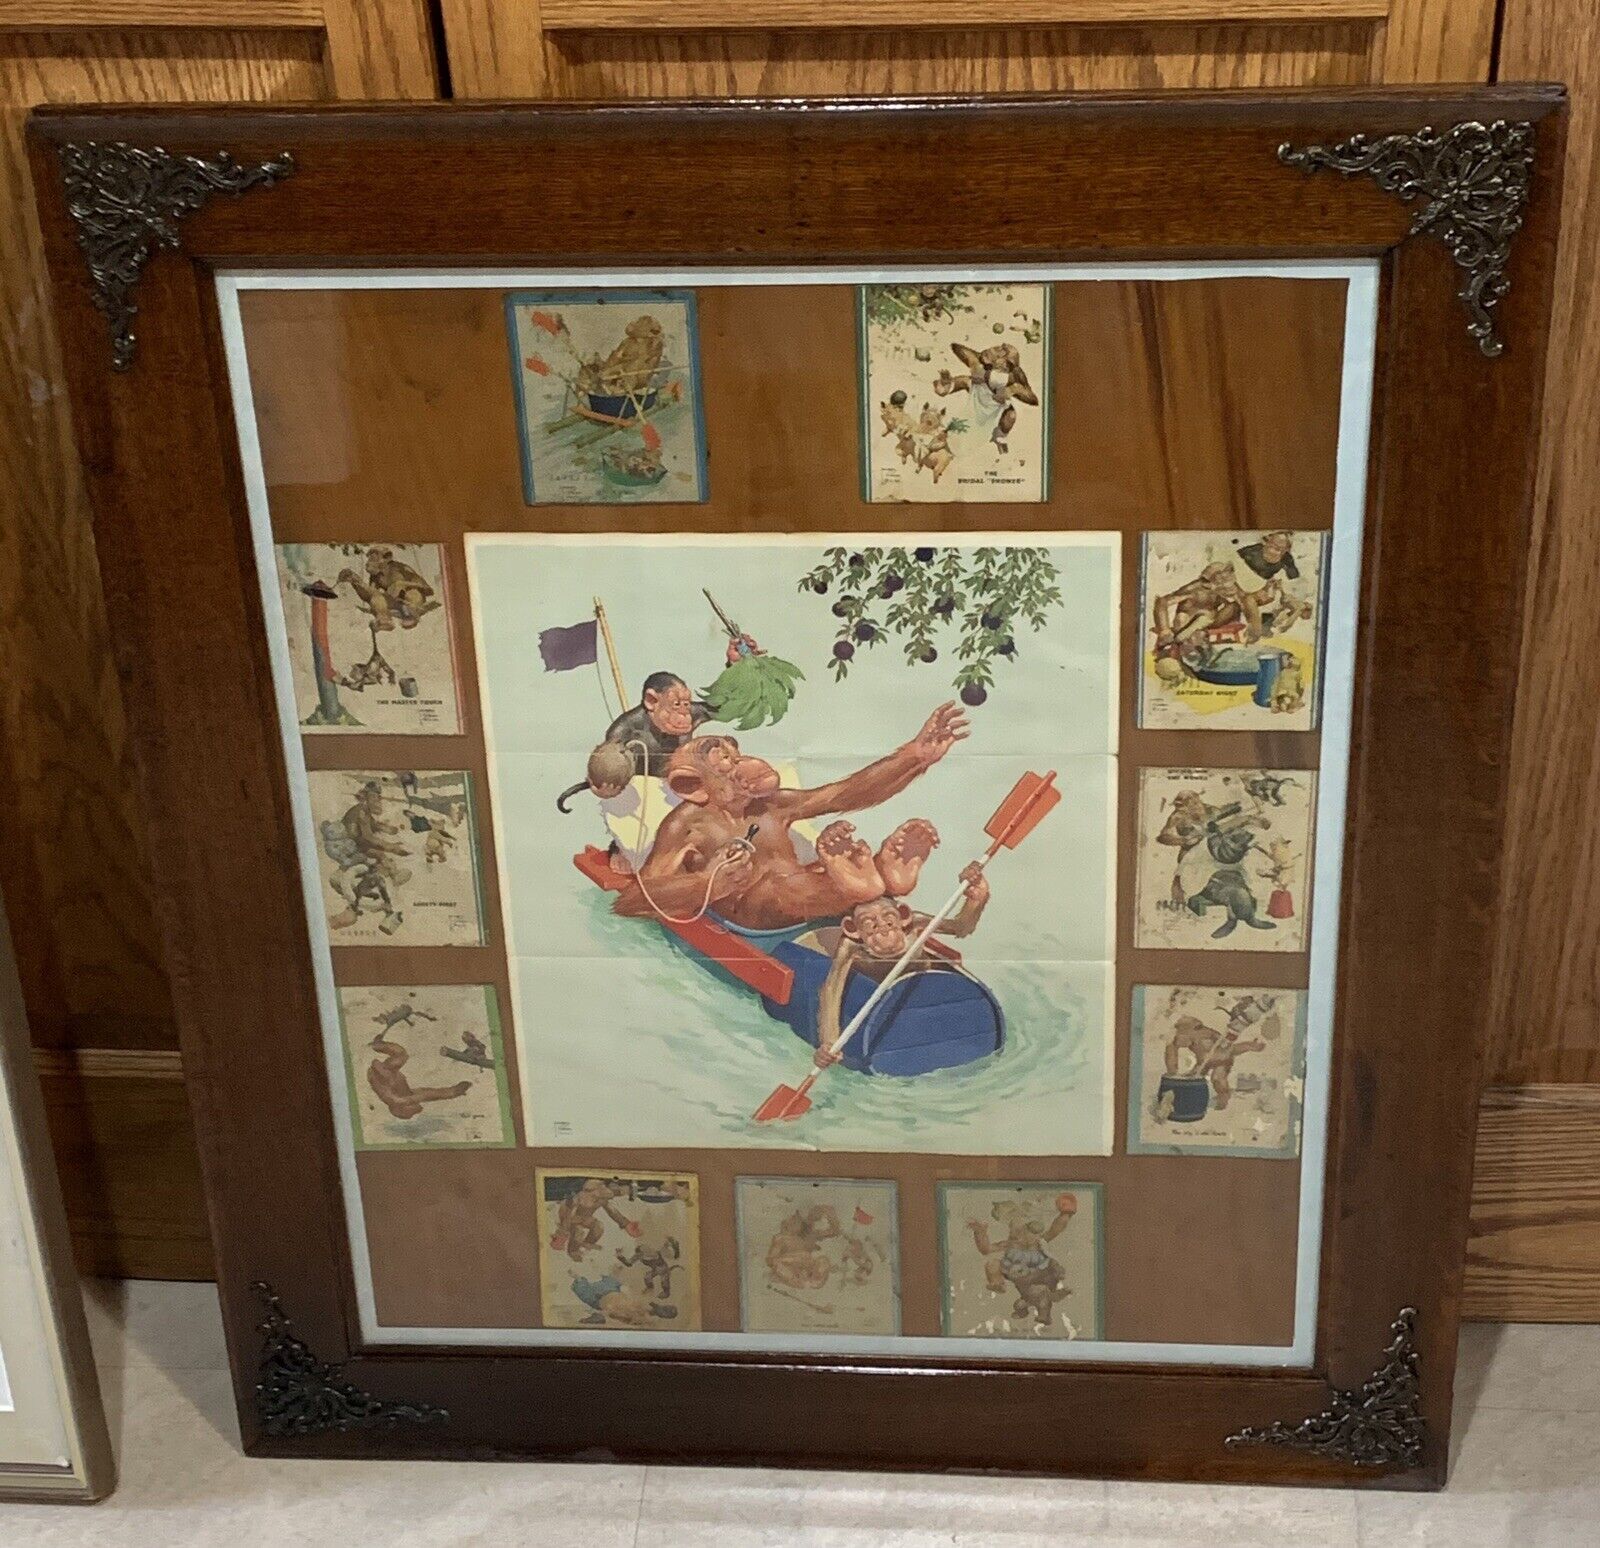 Vintage Artist Lawson Wood Cut Outs In Antique Frame